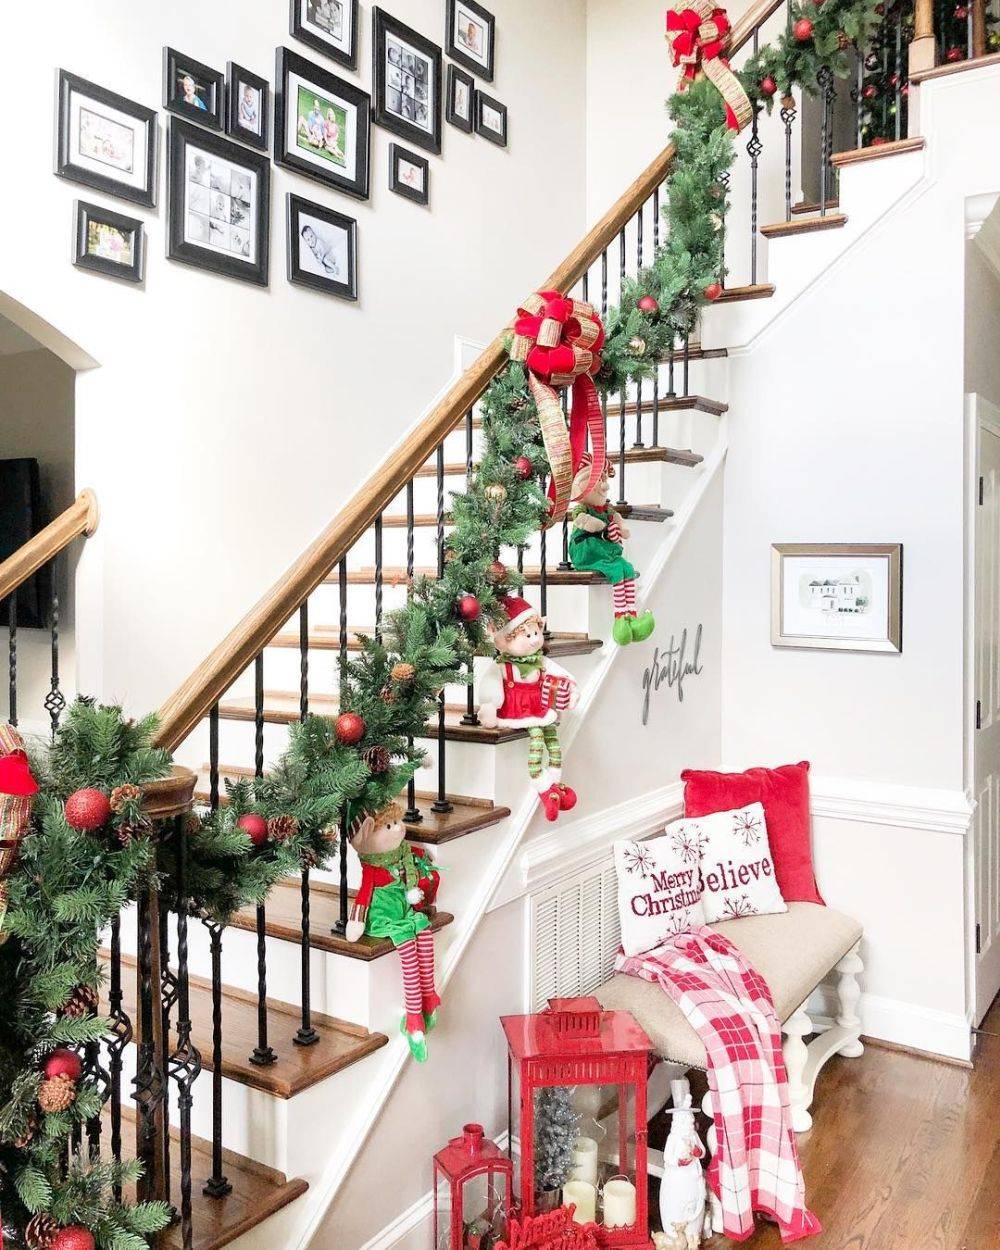 Fun way to decorate the entry with stairs using a Christmas garland and some elves